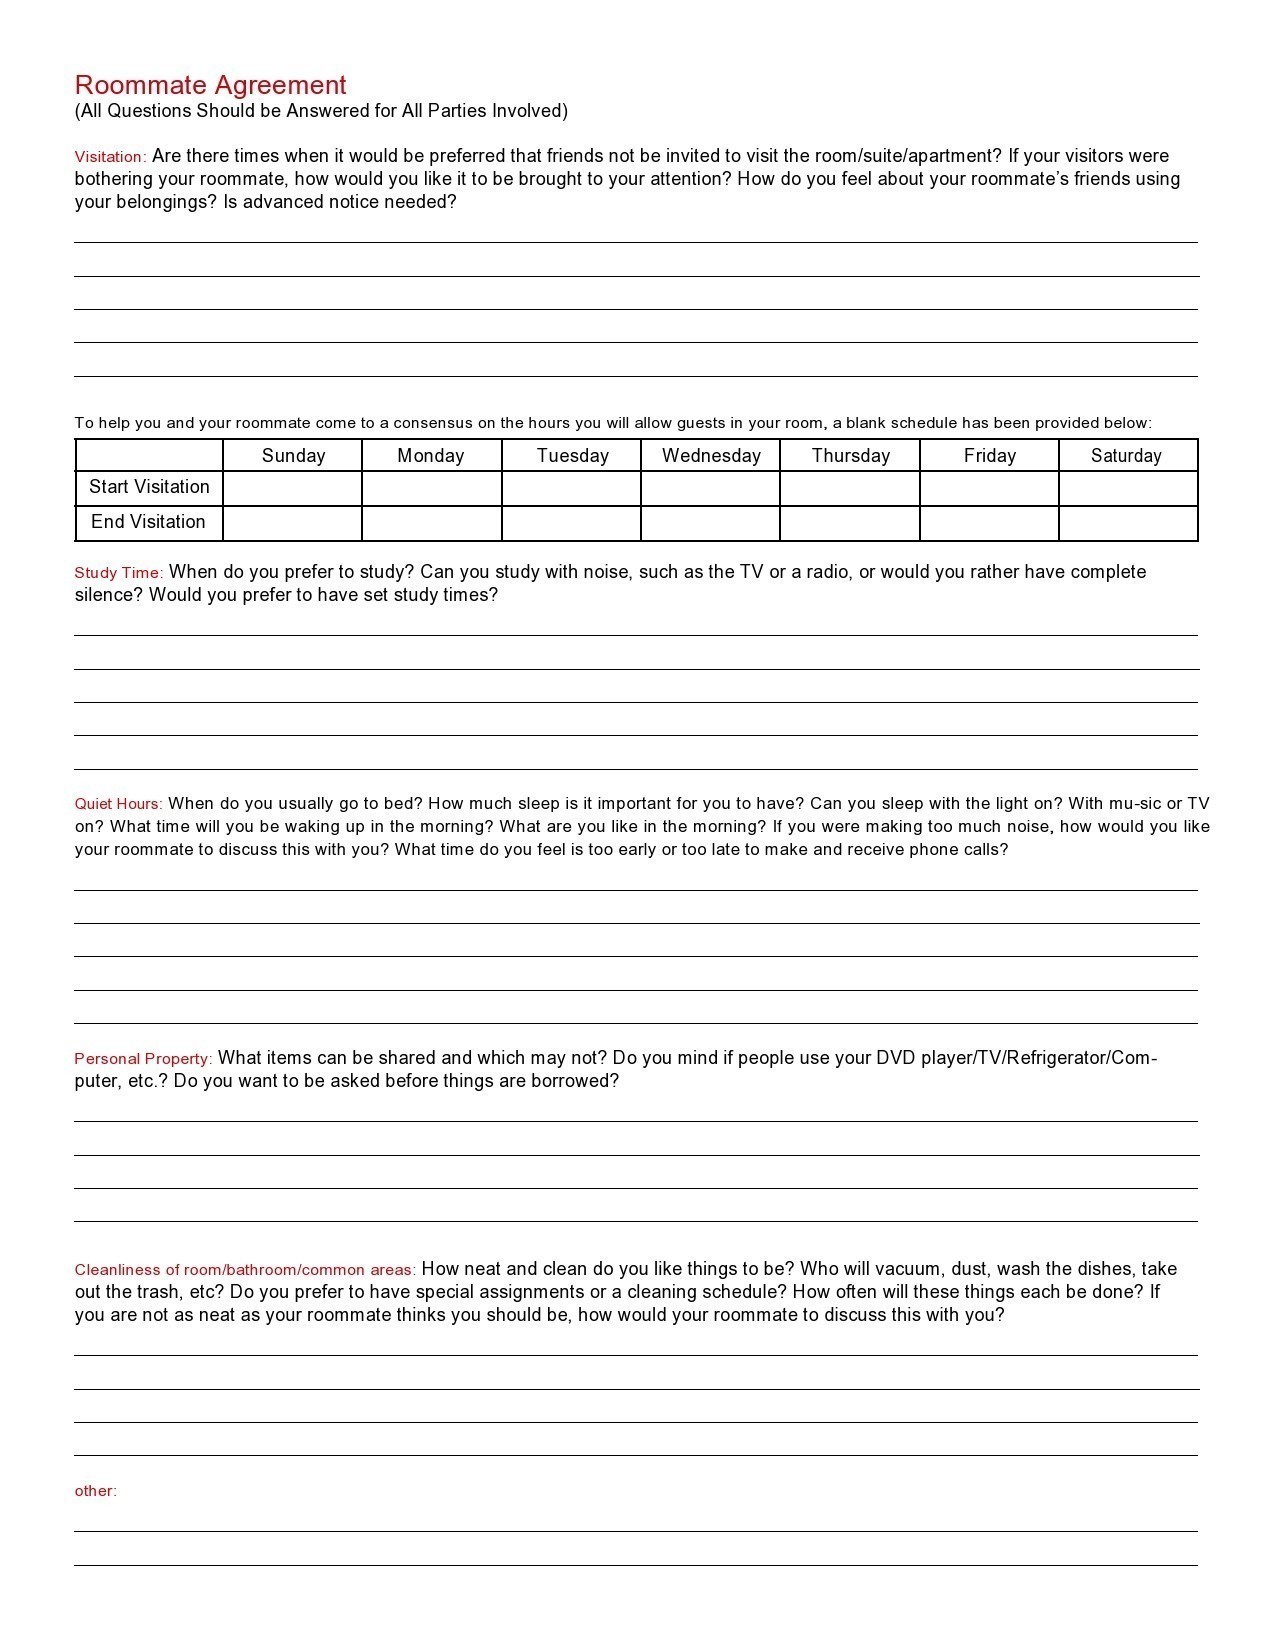 Free roommate agreement template 24